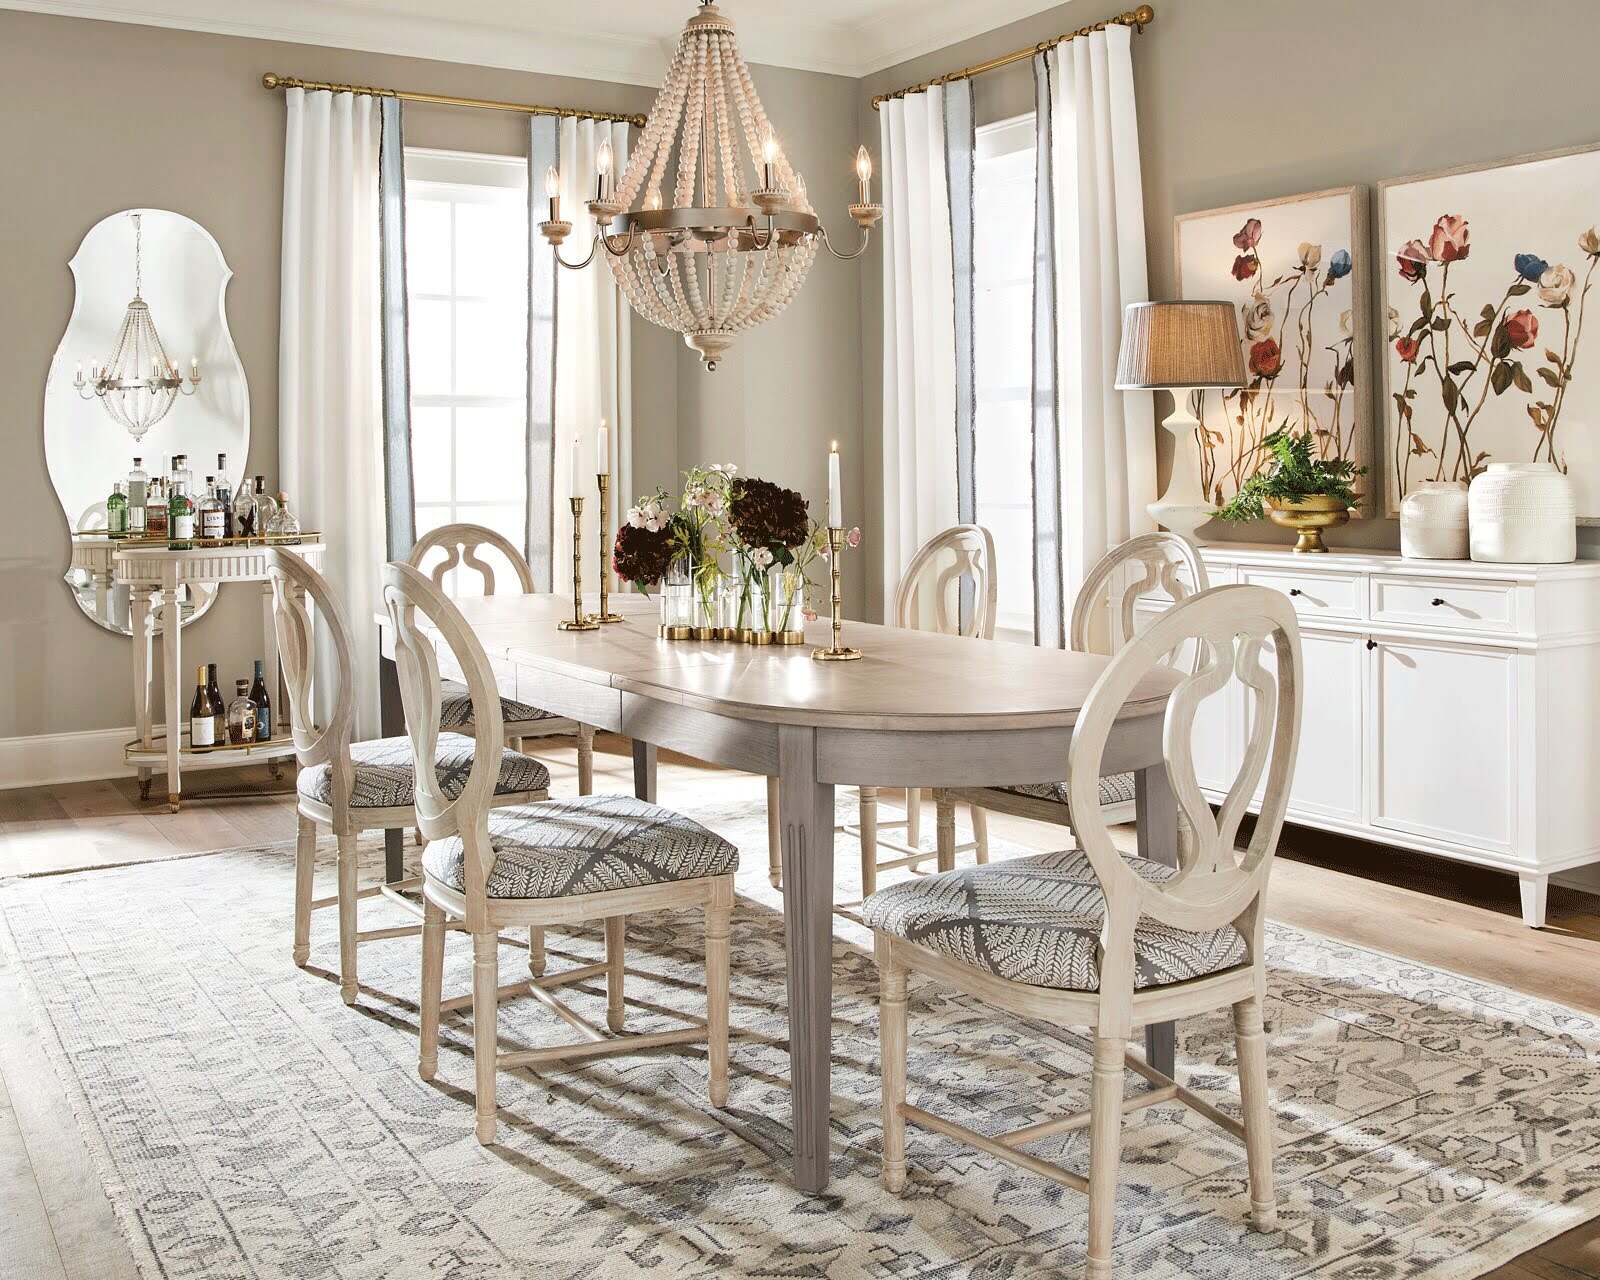 What Is The Best Style Dining Room Table For A 12×12 Room With No Wall Space